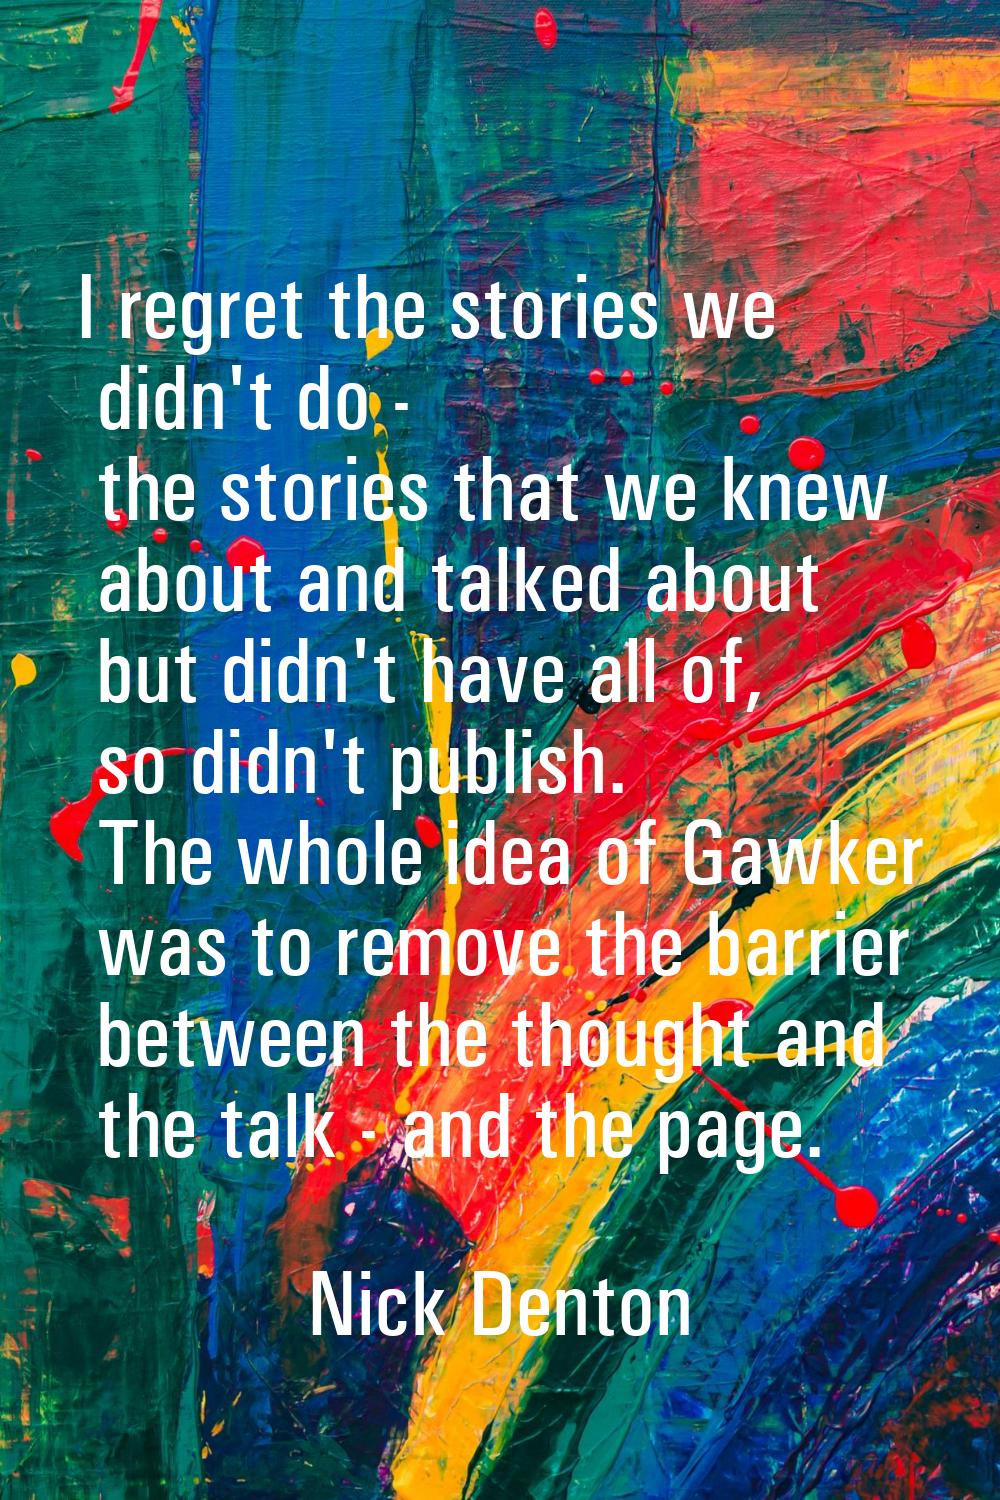 I regret the stories we didn't do - the stories that we knew about and talked about but didn't have